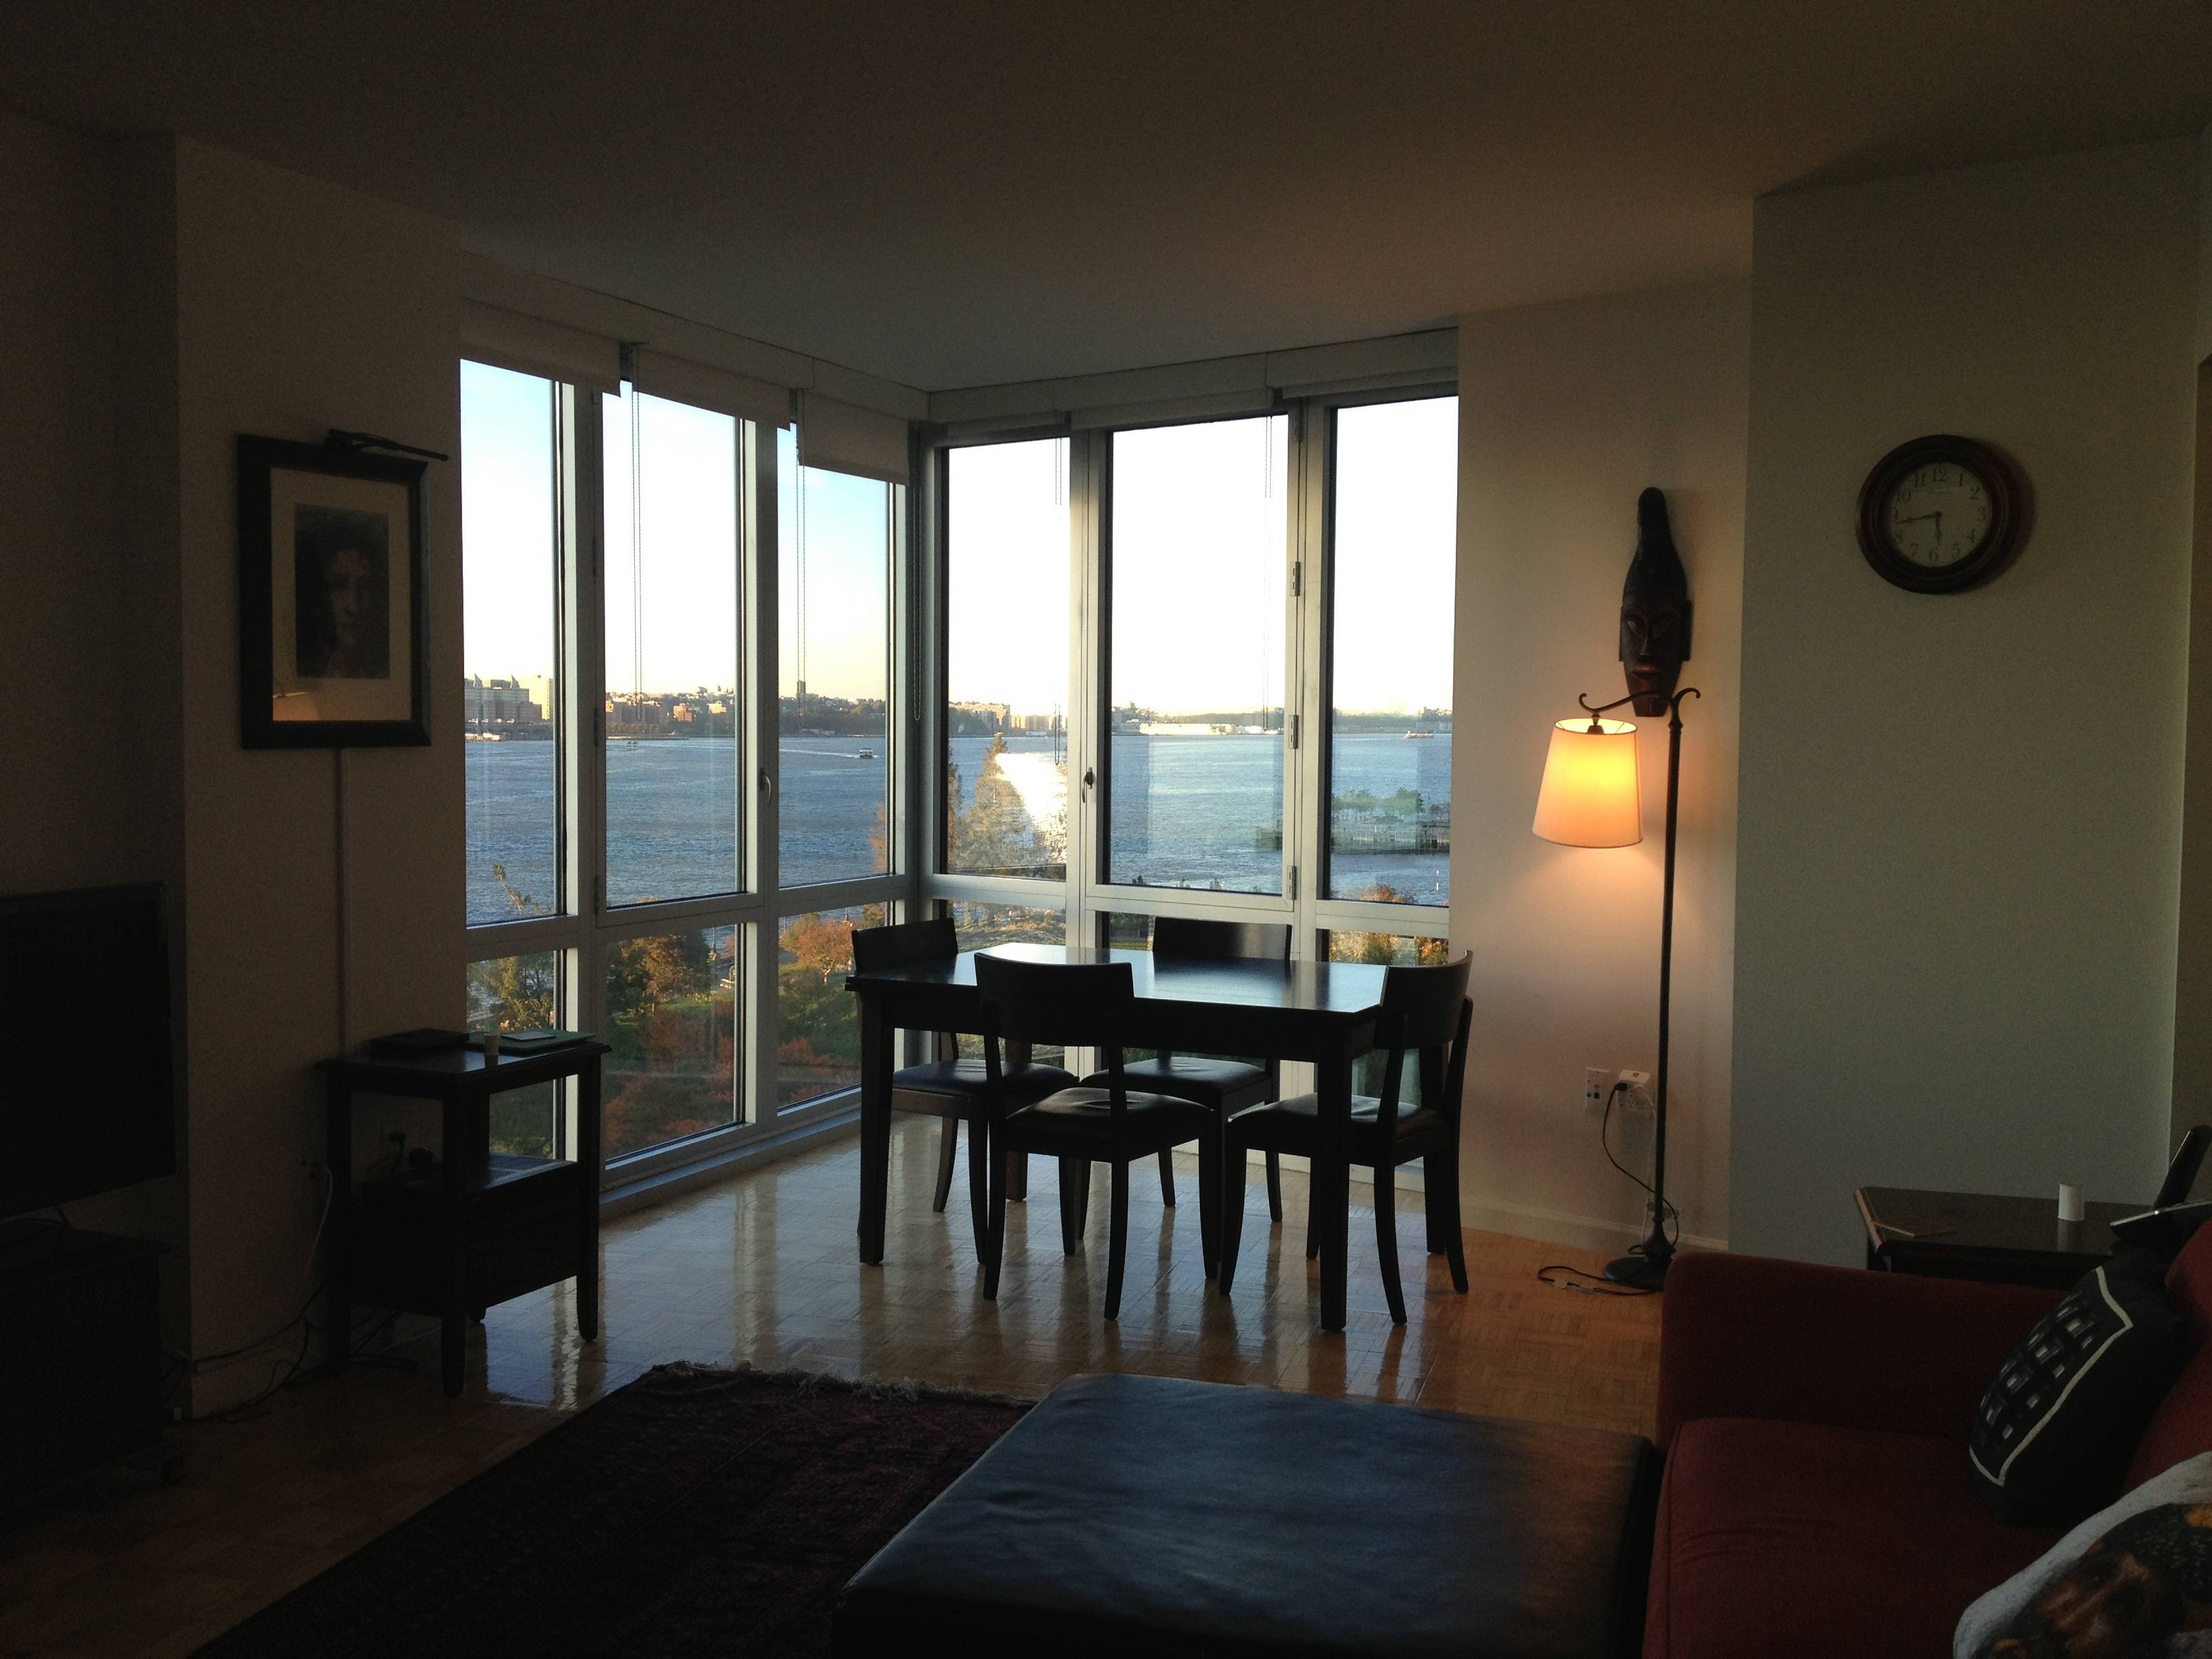 Downtown***Beautiful BATTERY PARK***SPECTACULAR VIEWS***3 bedroom/3 bath***LEASE ASSIGNMENT***$8865 